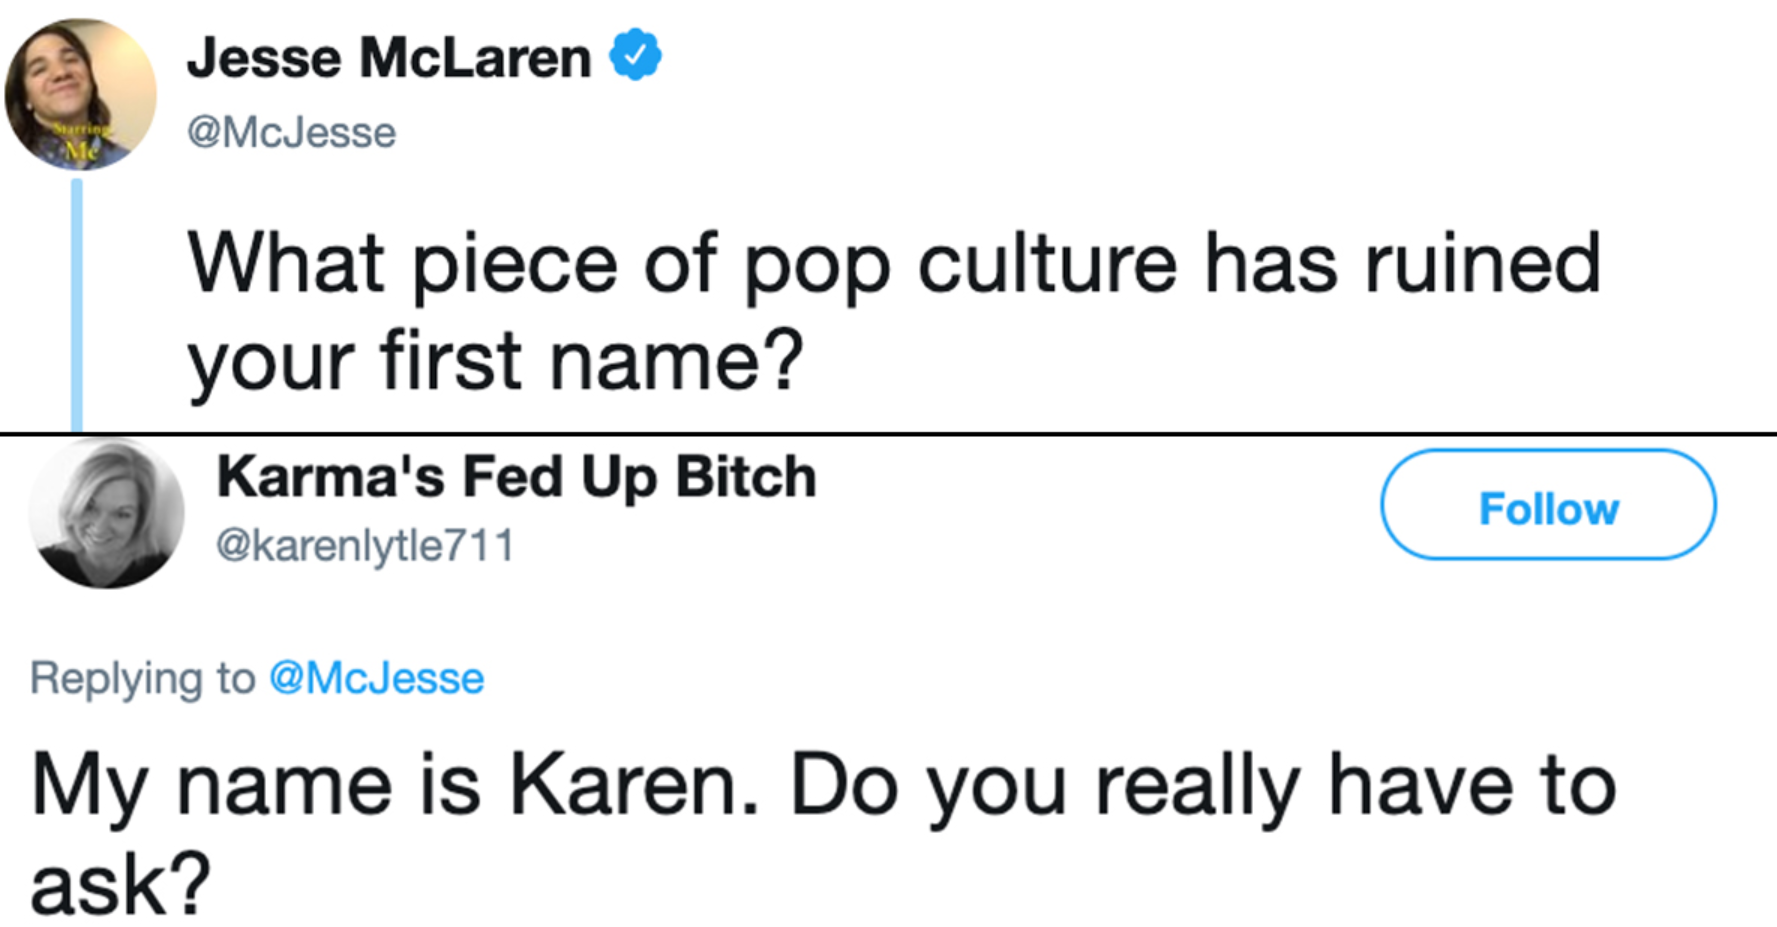 These people reckon pop culture has ruined their names